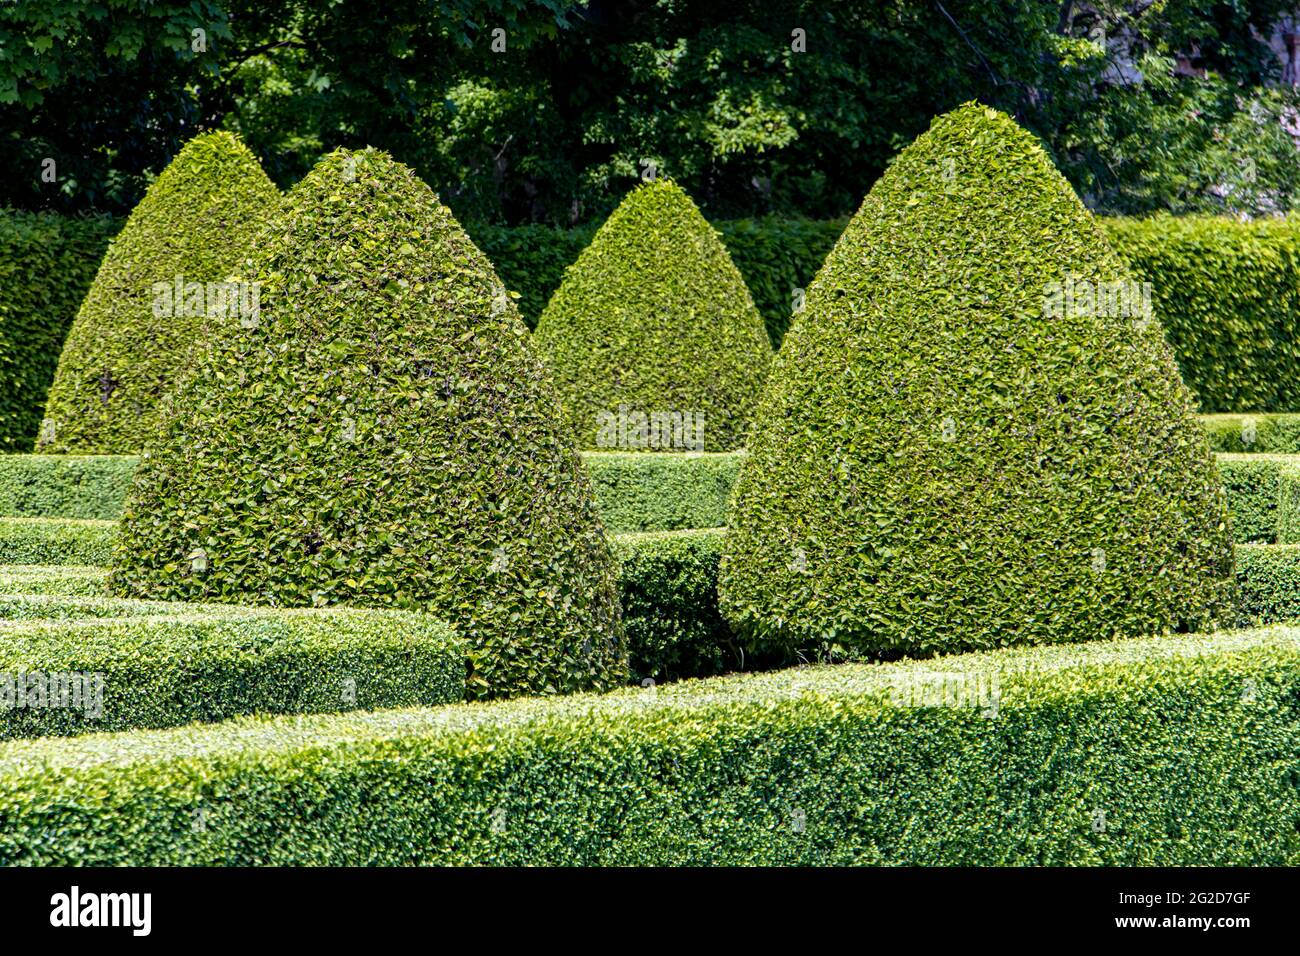 Summer park with decoratively cut trees and hedges Stock Photo